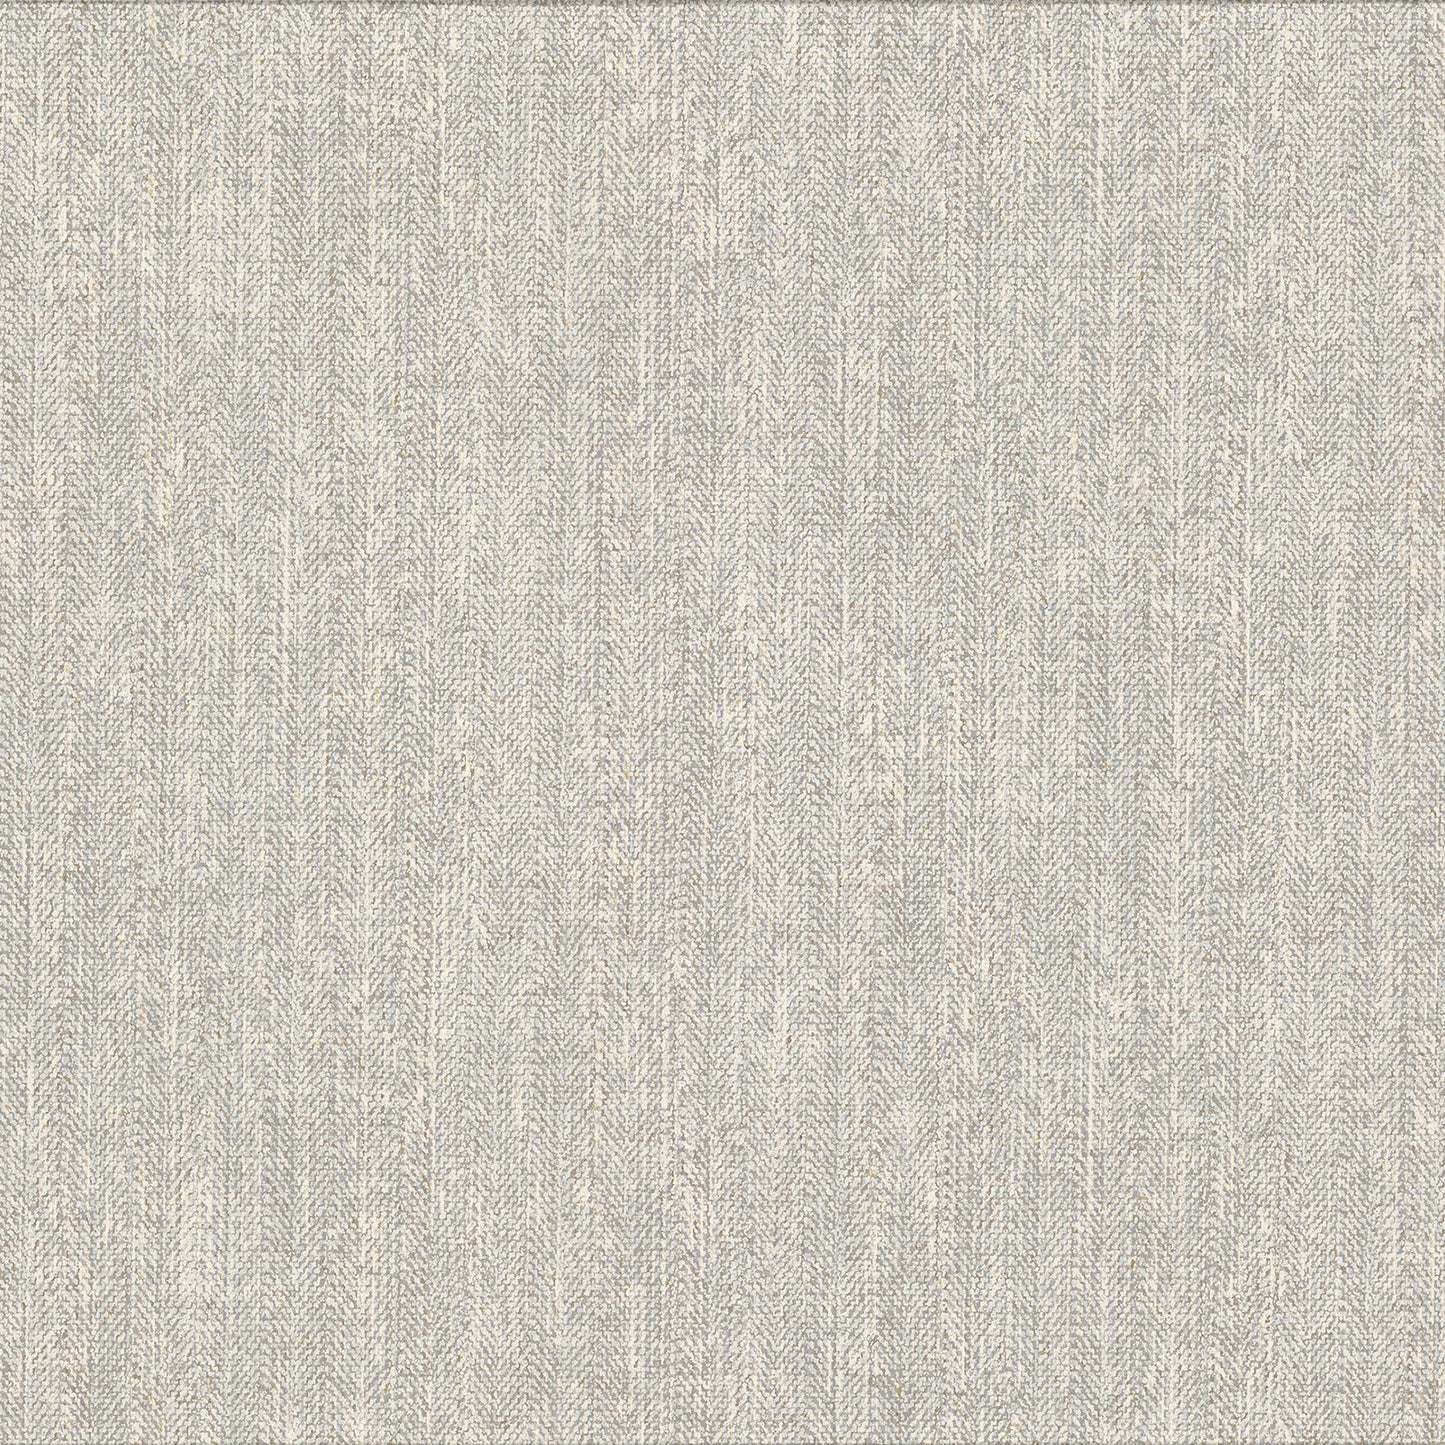 Search 2959-AWNEW-1064 Textural Essentials Soyer Off-White Woven Texture Off-White Brewster Wallpaper